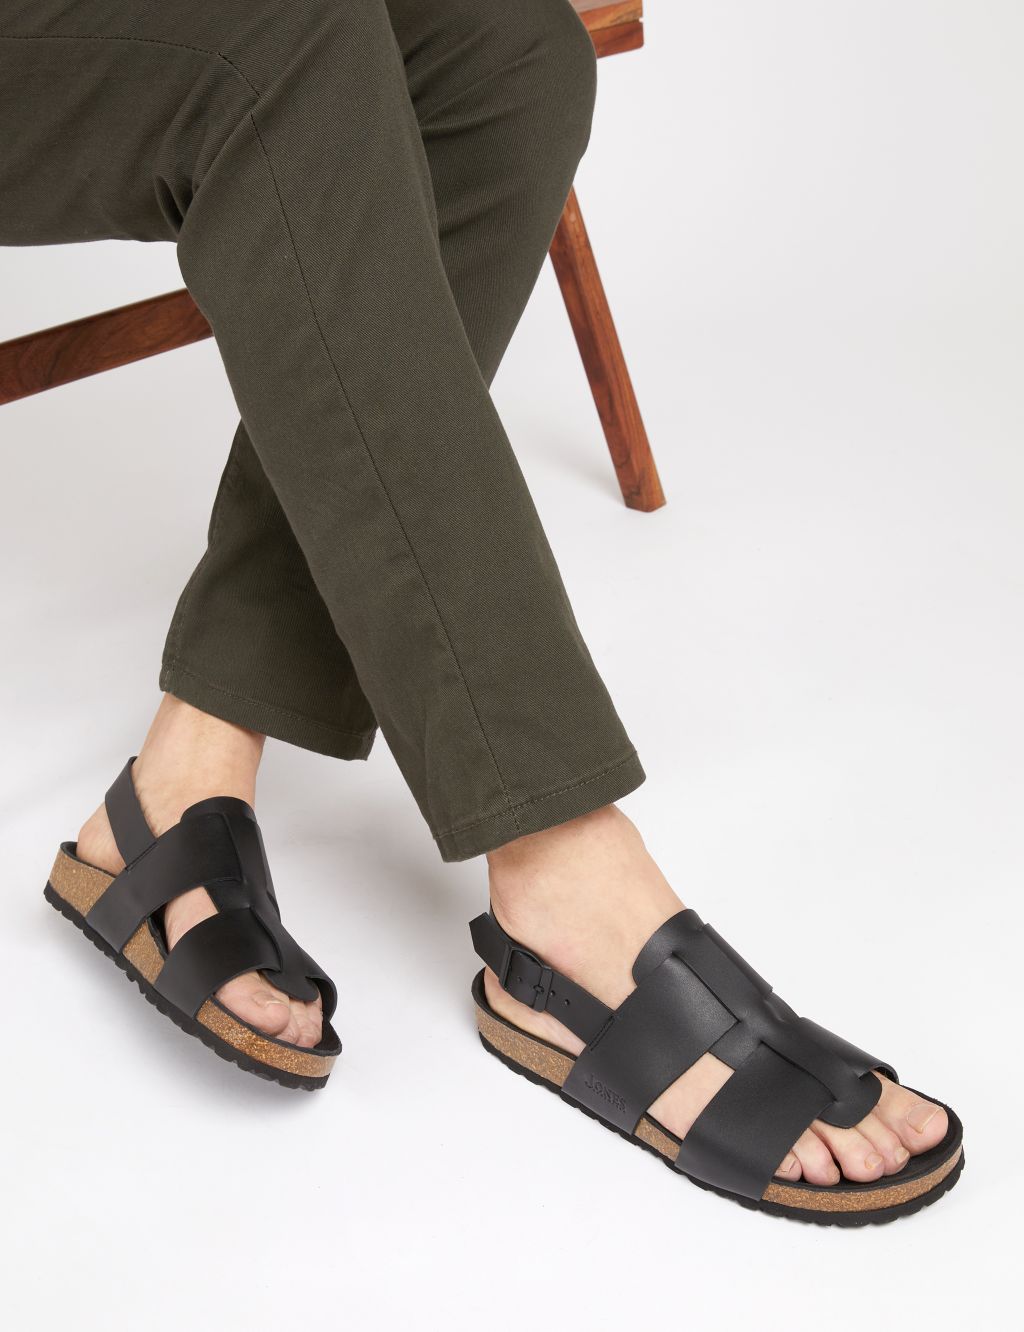 Leather Sandals image 1